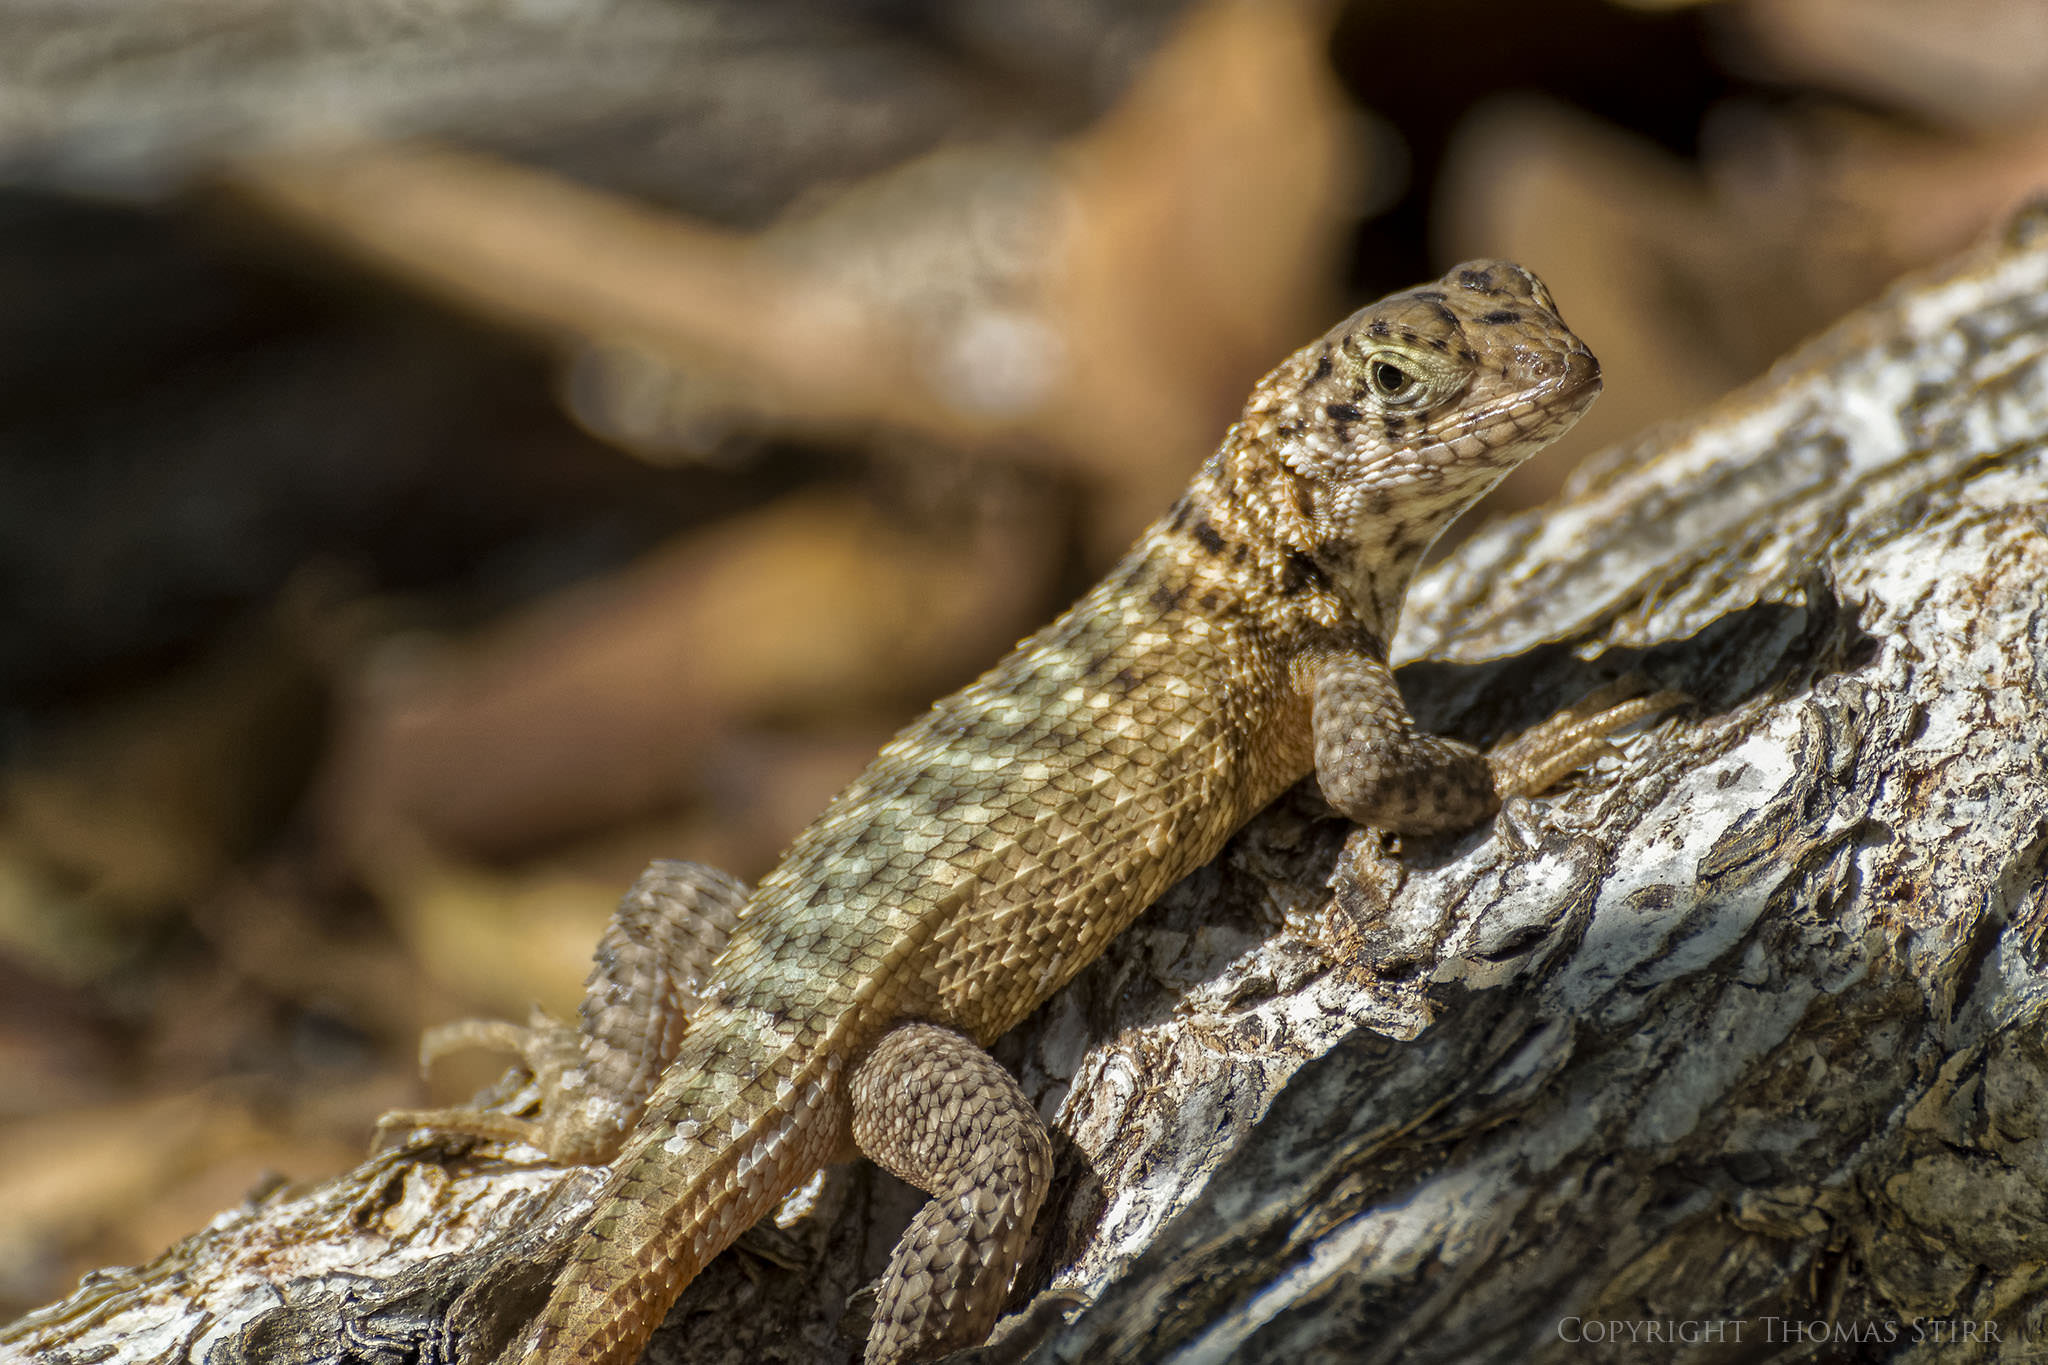 Tips for Photographing Small Lizards - Photography Life